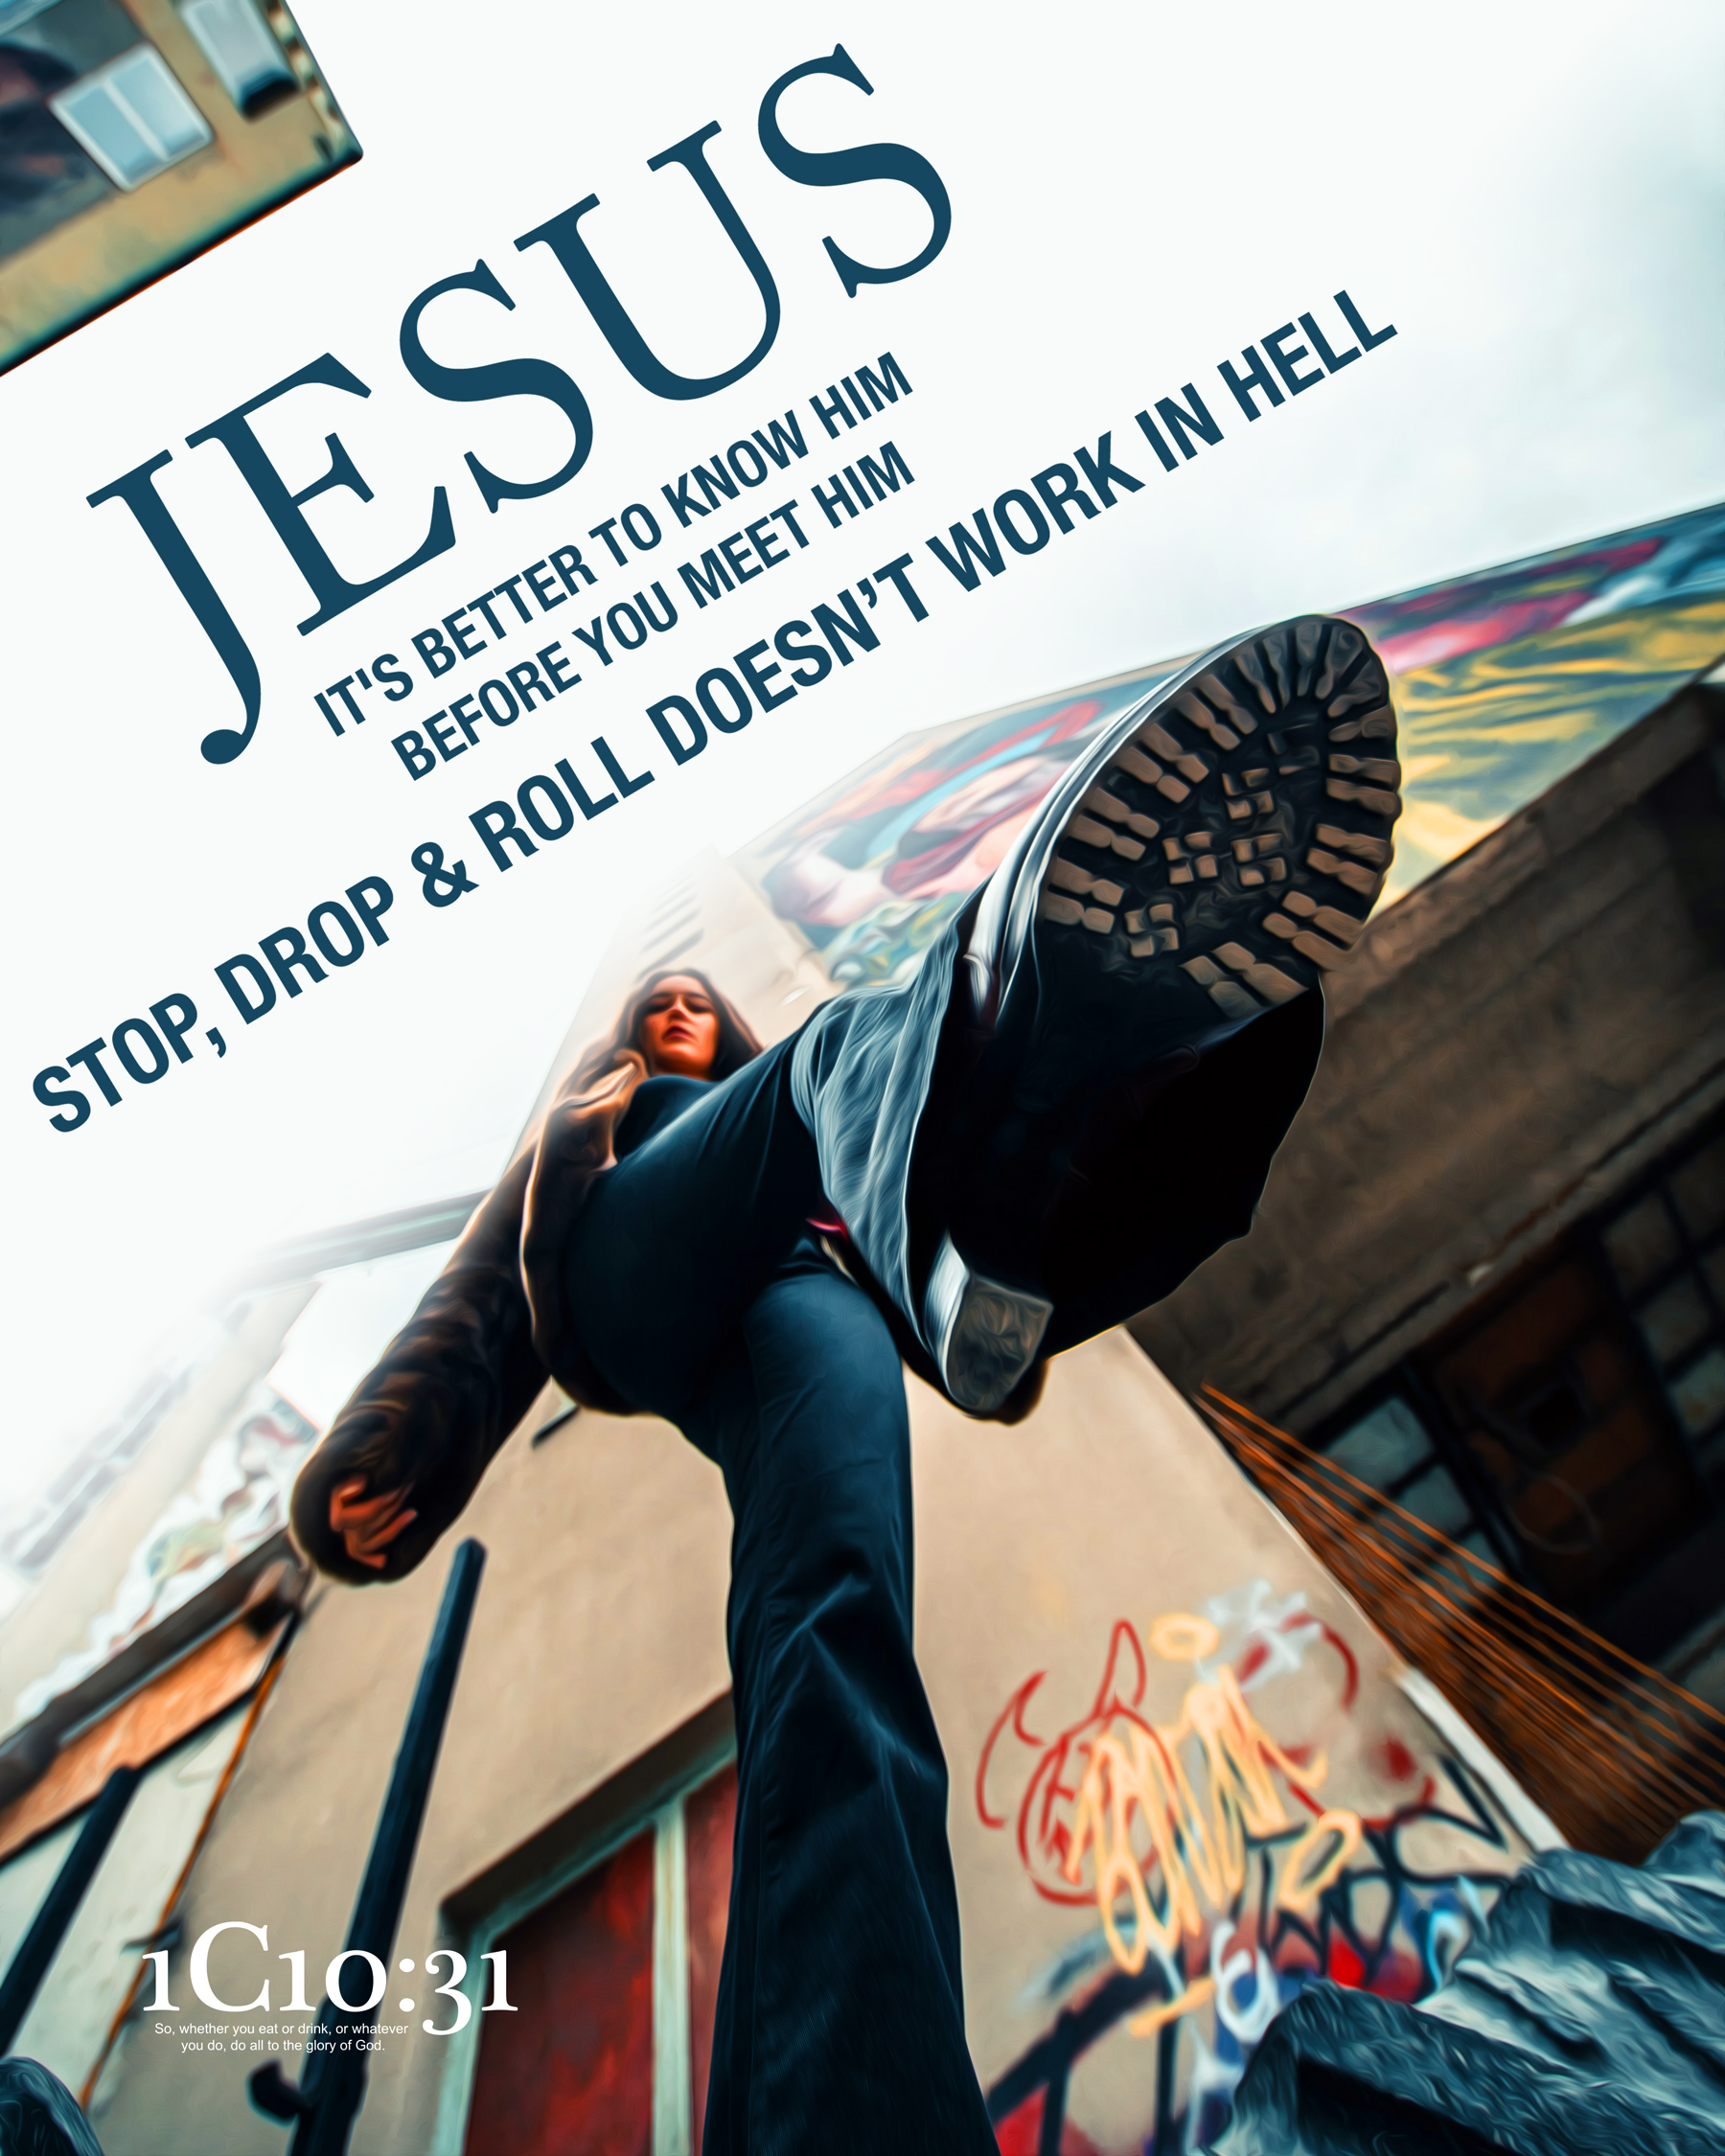 Jesus - It's Better To Know Him Before You Meet Him Stop, Drop & Roll Doesn’t Work In Hell